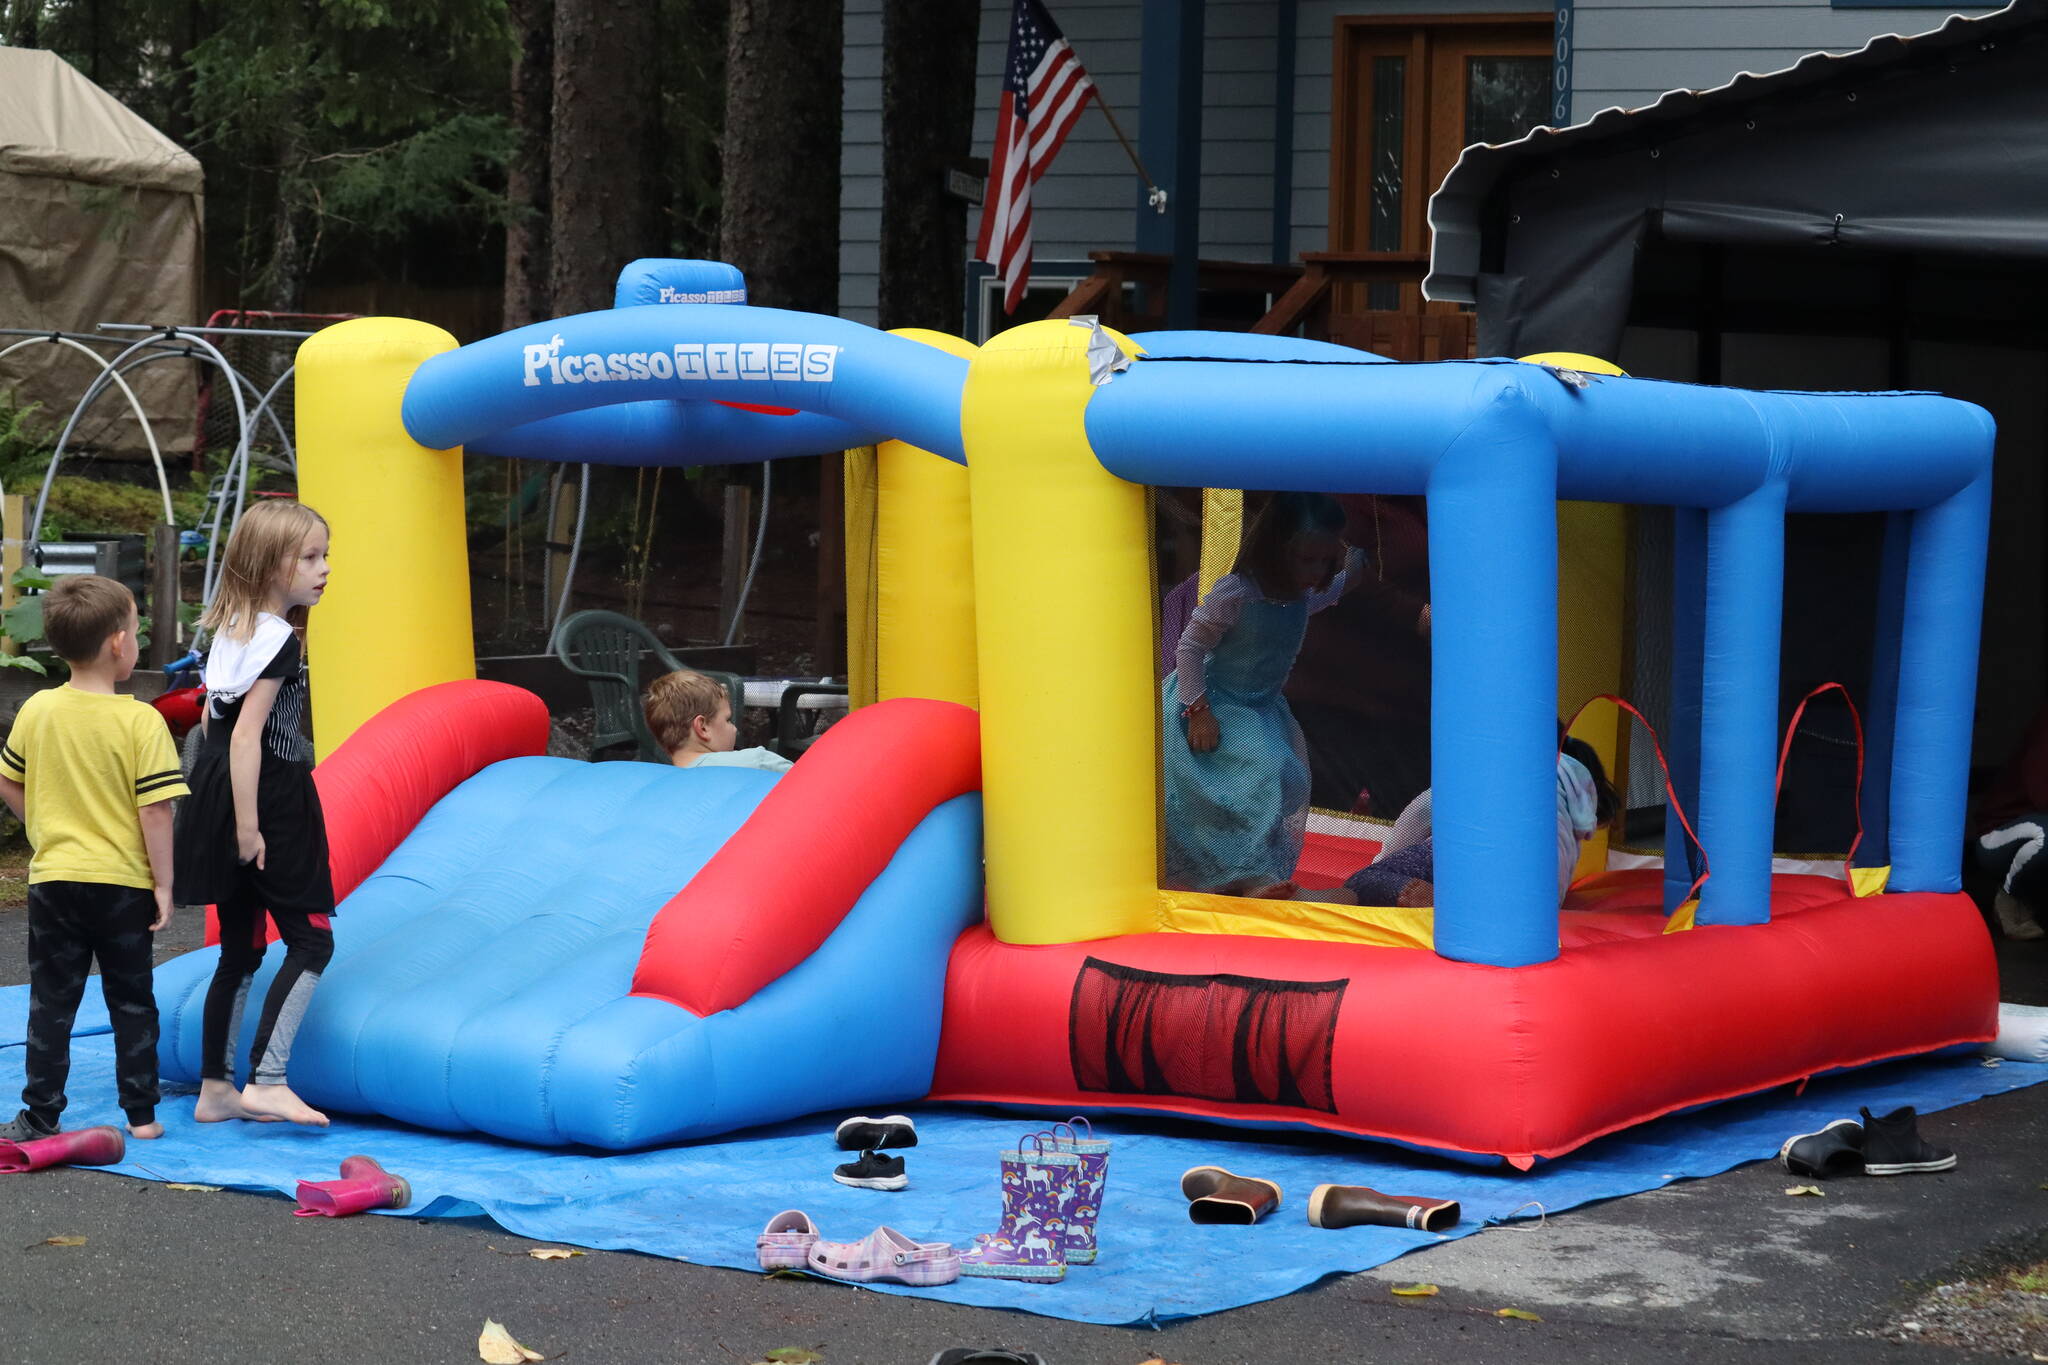 A bouncy castle along with games and snacks were prepared for the public on Firndale Street. They were also joined by first responders. (Jonson Kuhn / Juneau Empire)